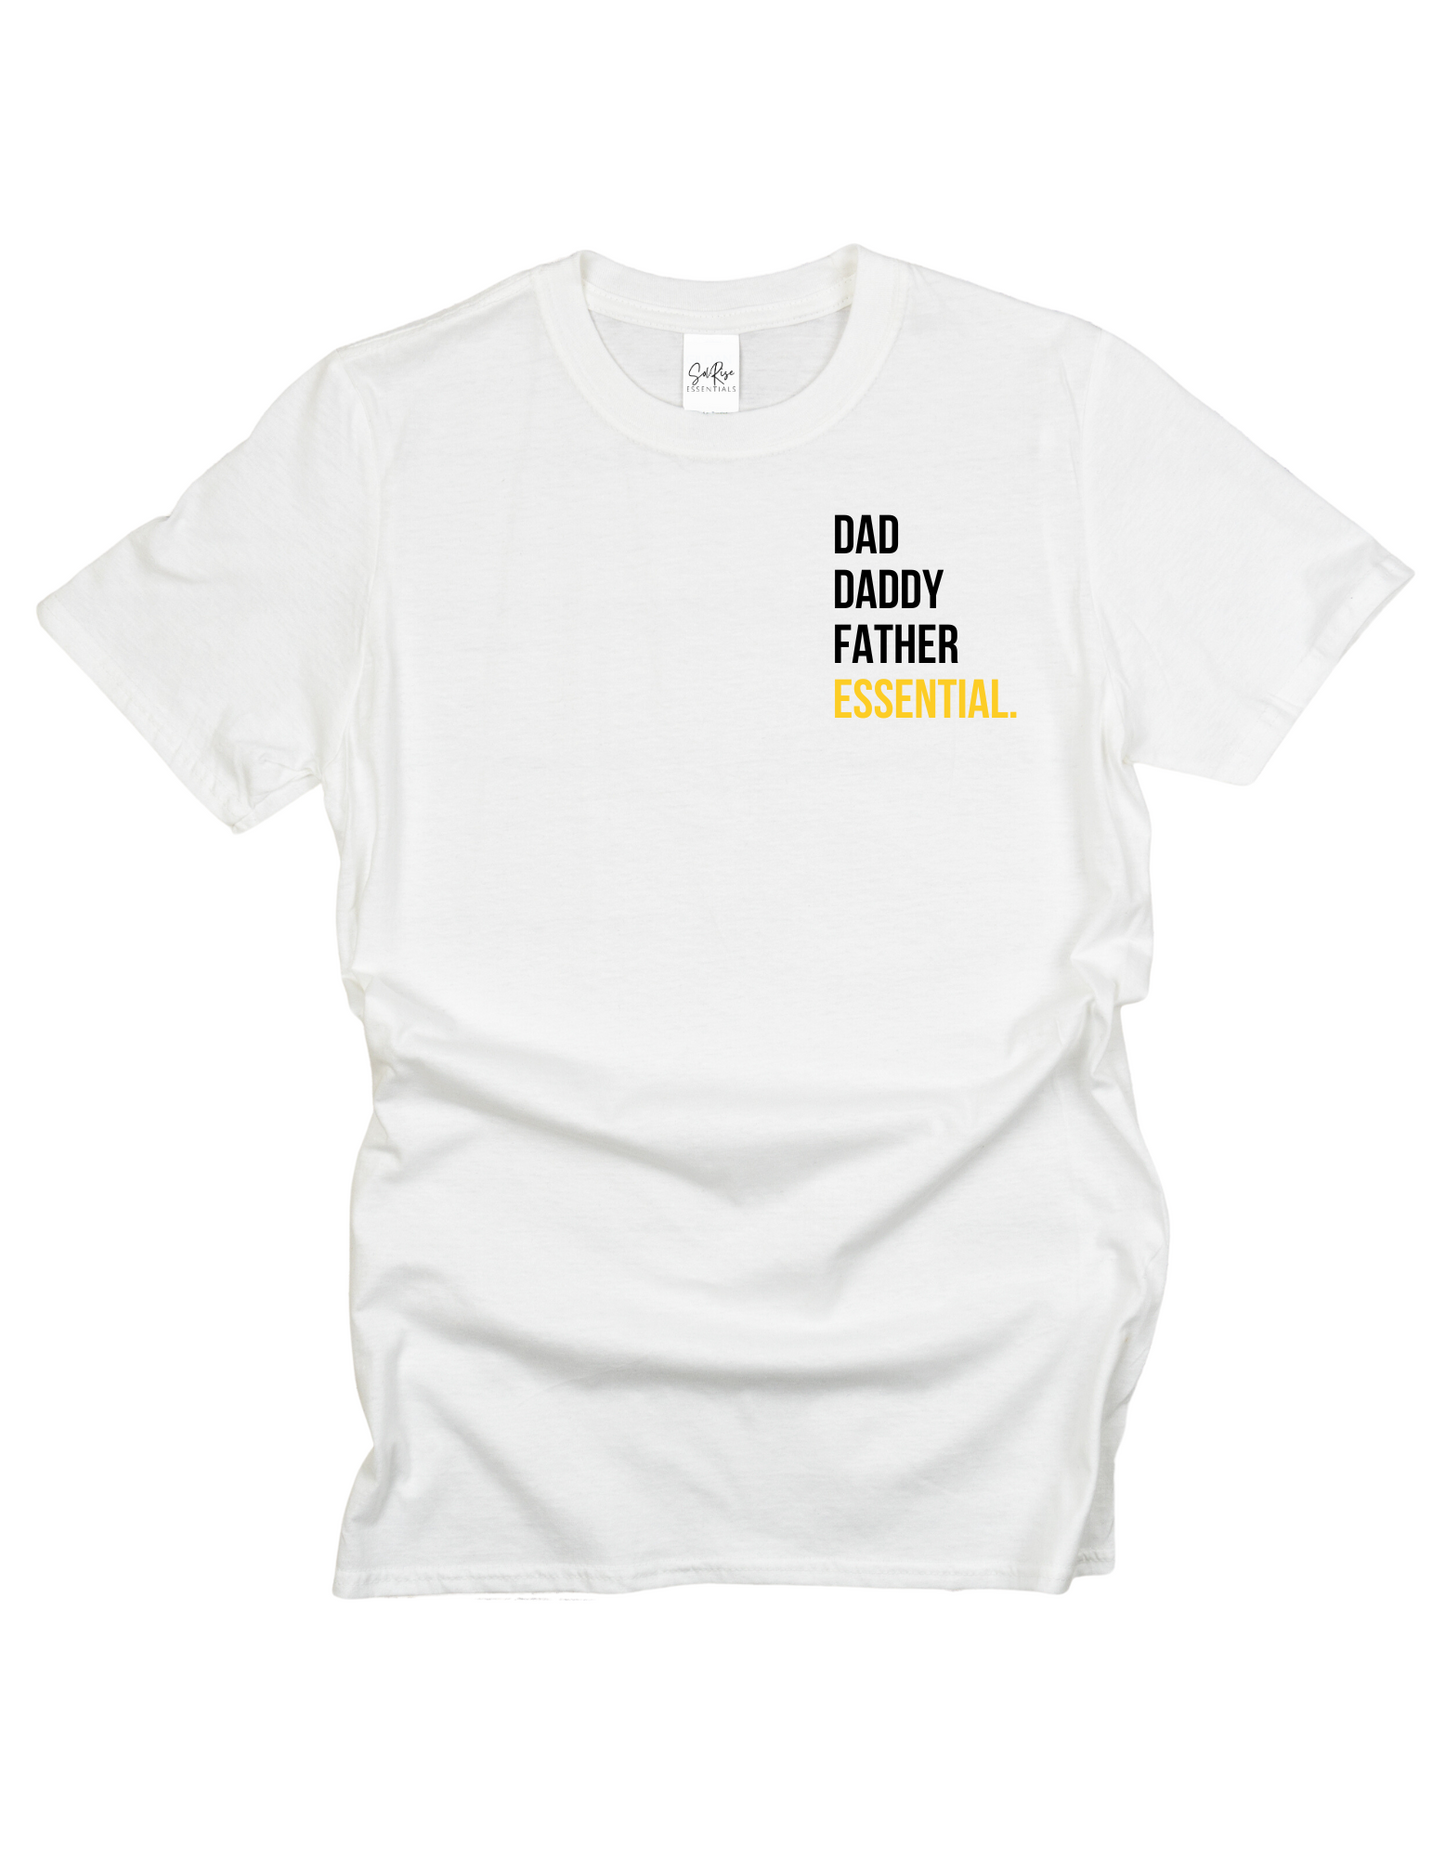 Essential Dad tee from Sol Rise Essentials - fathers day tshirt for great dads in color white